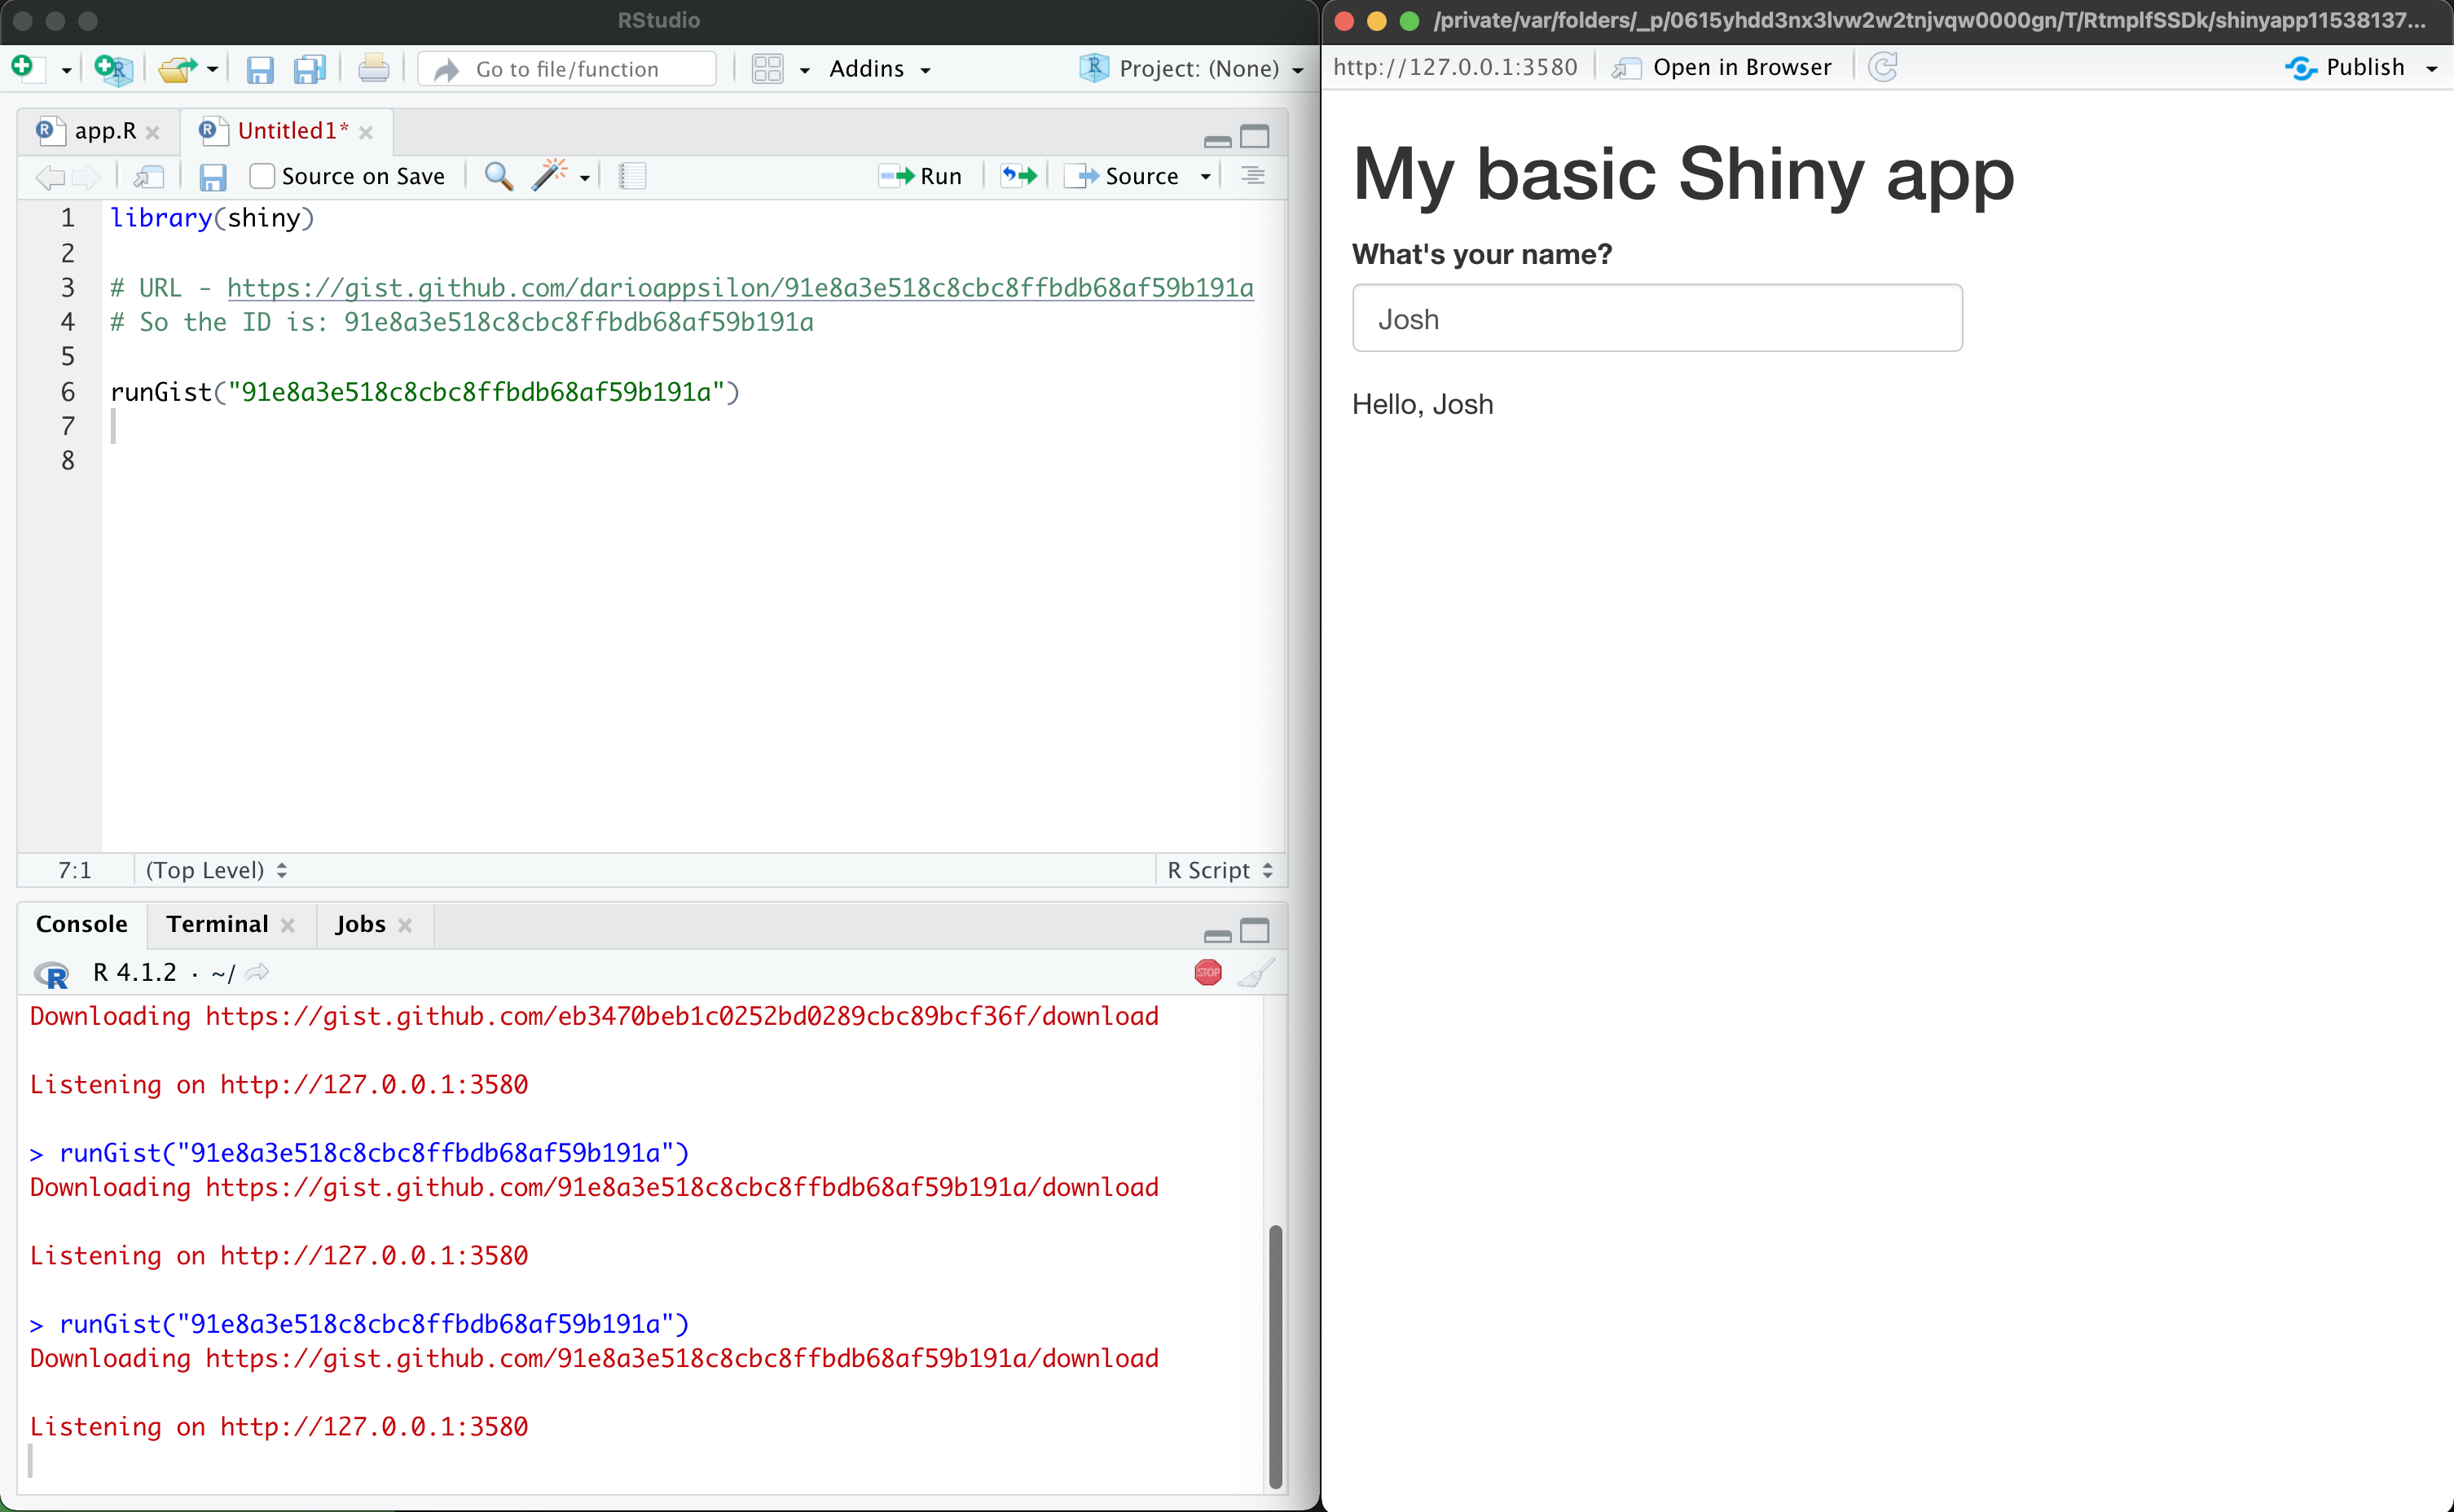 Image 3 - Running an R Shiny app from a GitHub gist